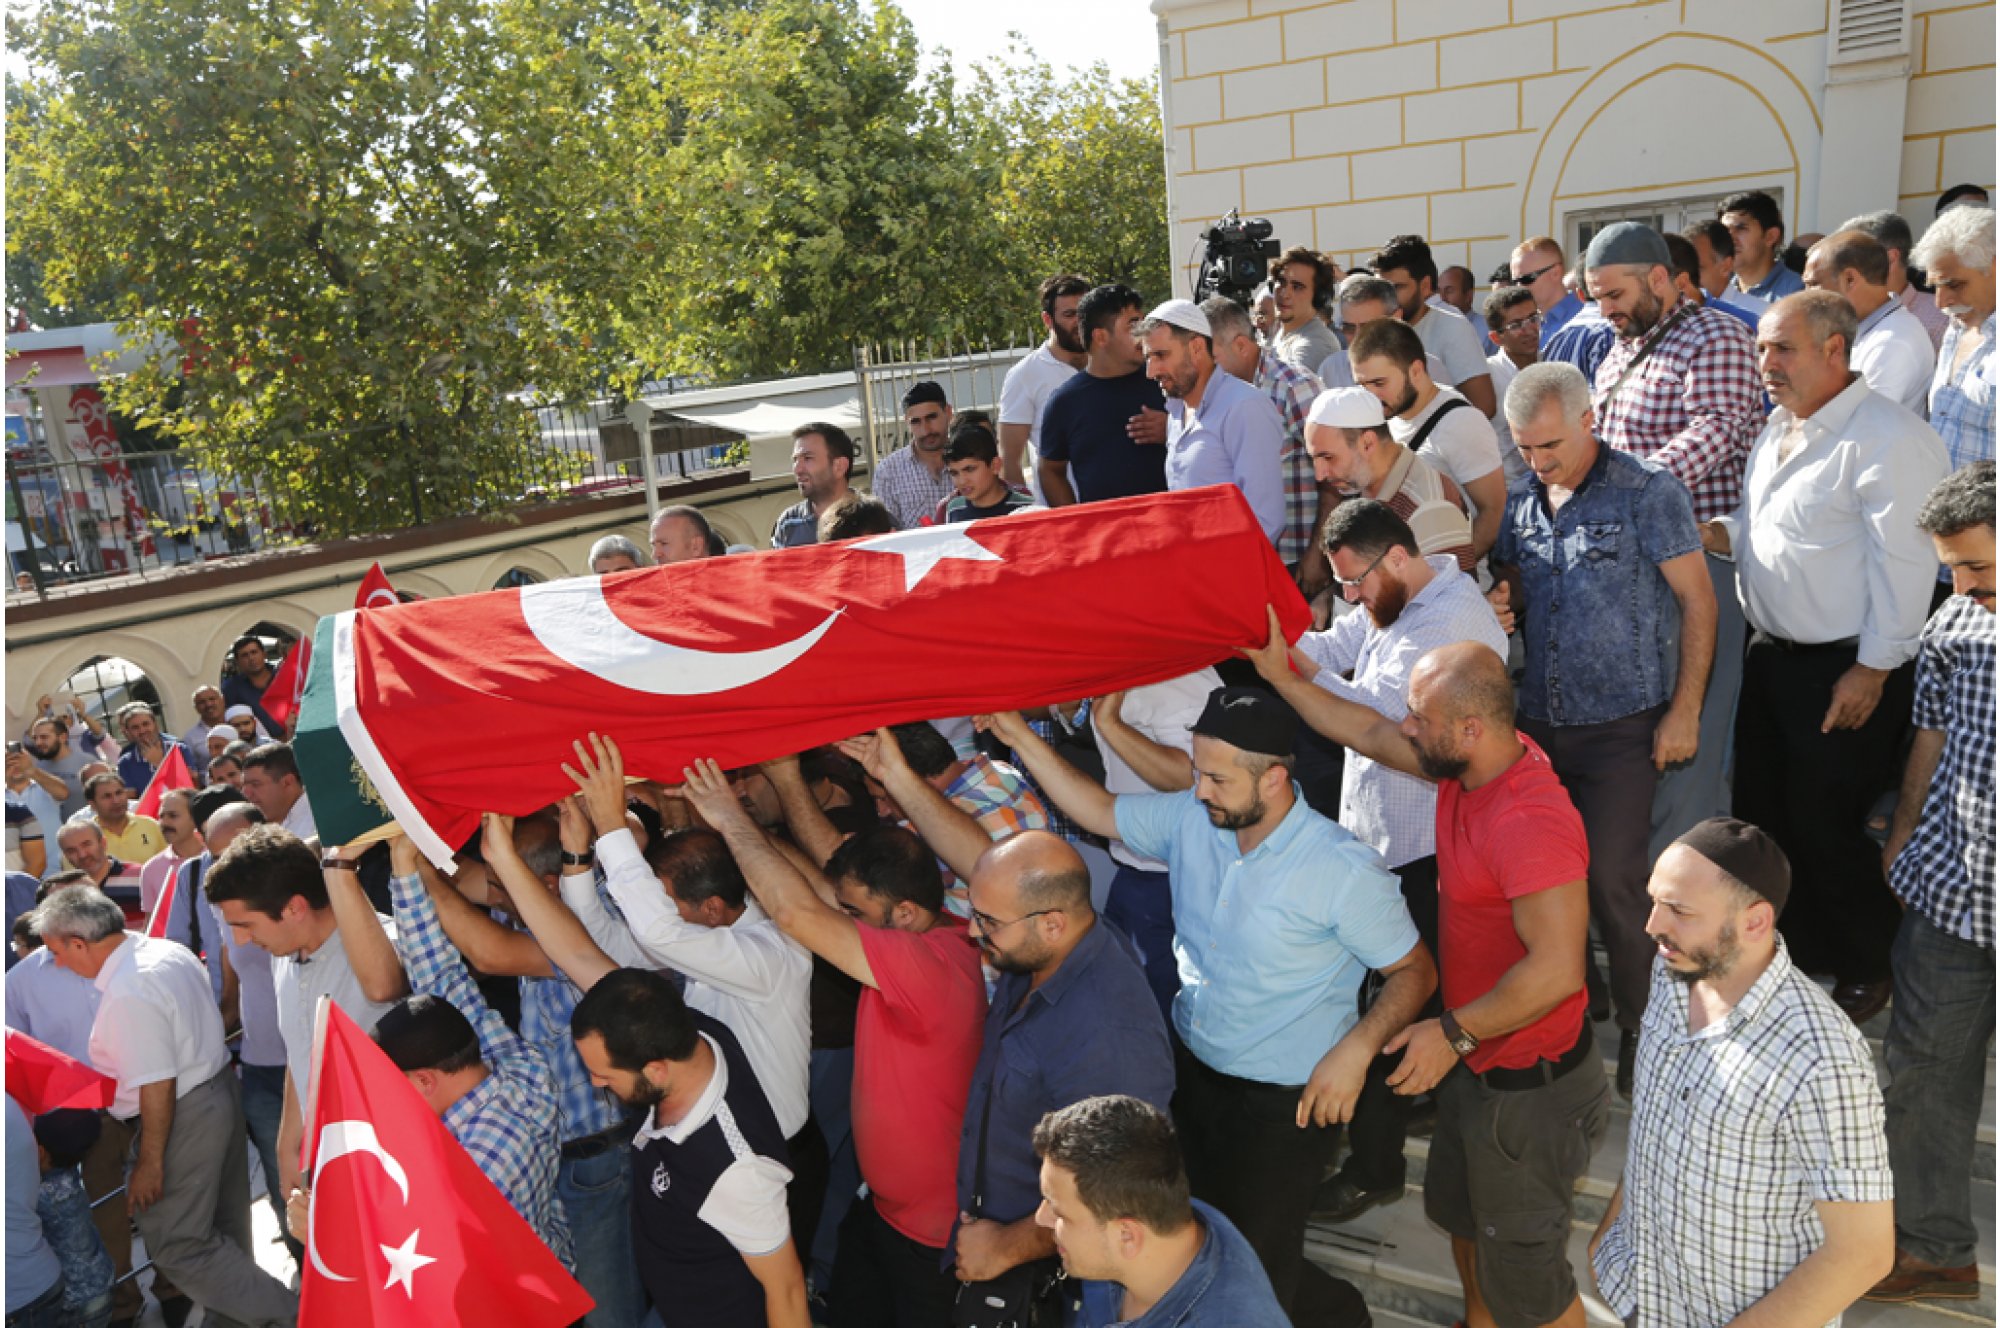 His coffin was wrapped in a Turkish flag and brought to the funeral from the Forensic Medicine Institution.